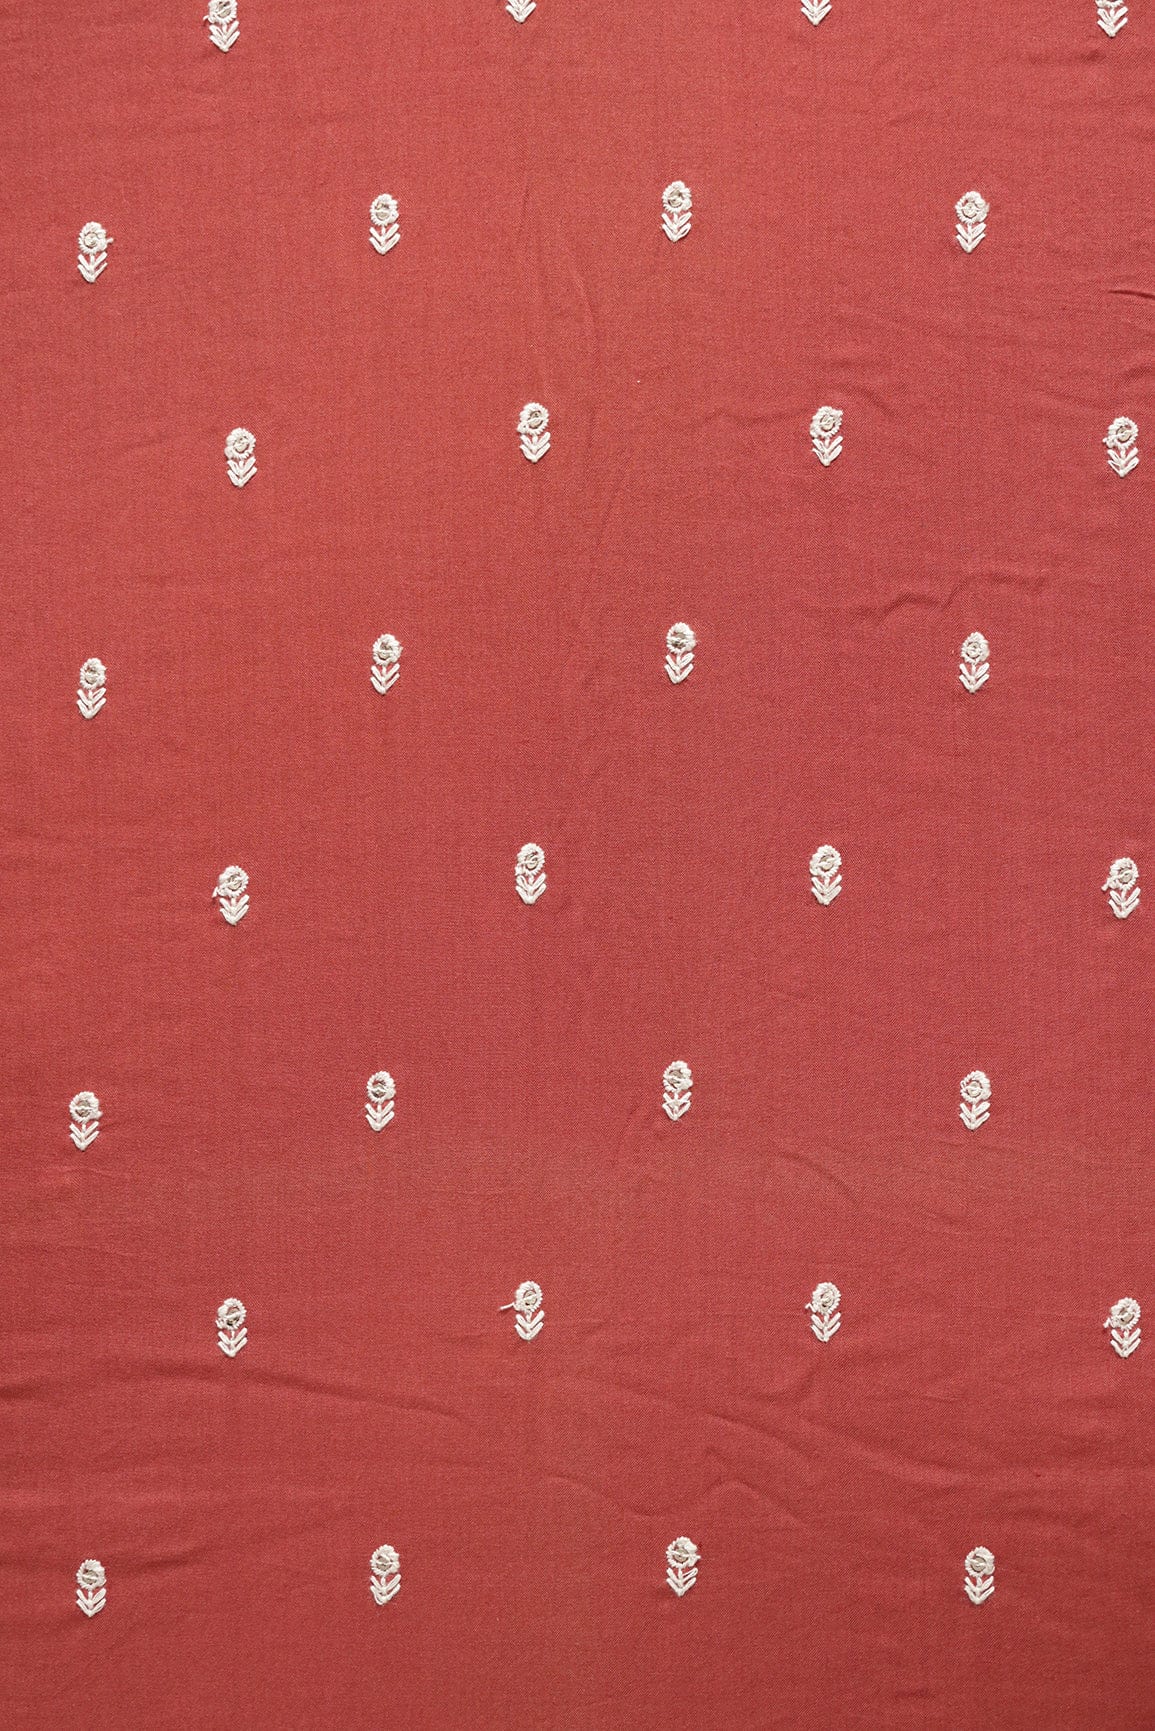 doeraa Embroidery Fabrics White Thread With Sequins Small Floral Motif Embroidery Work On Rust Red Muslin Fabric